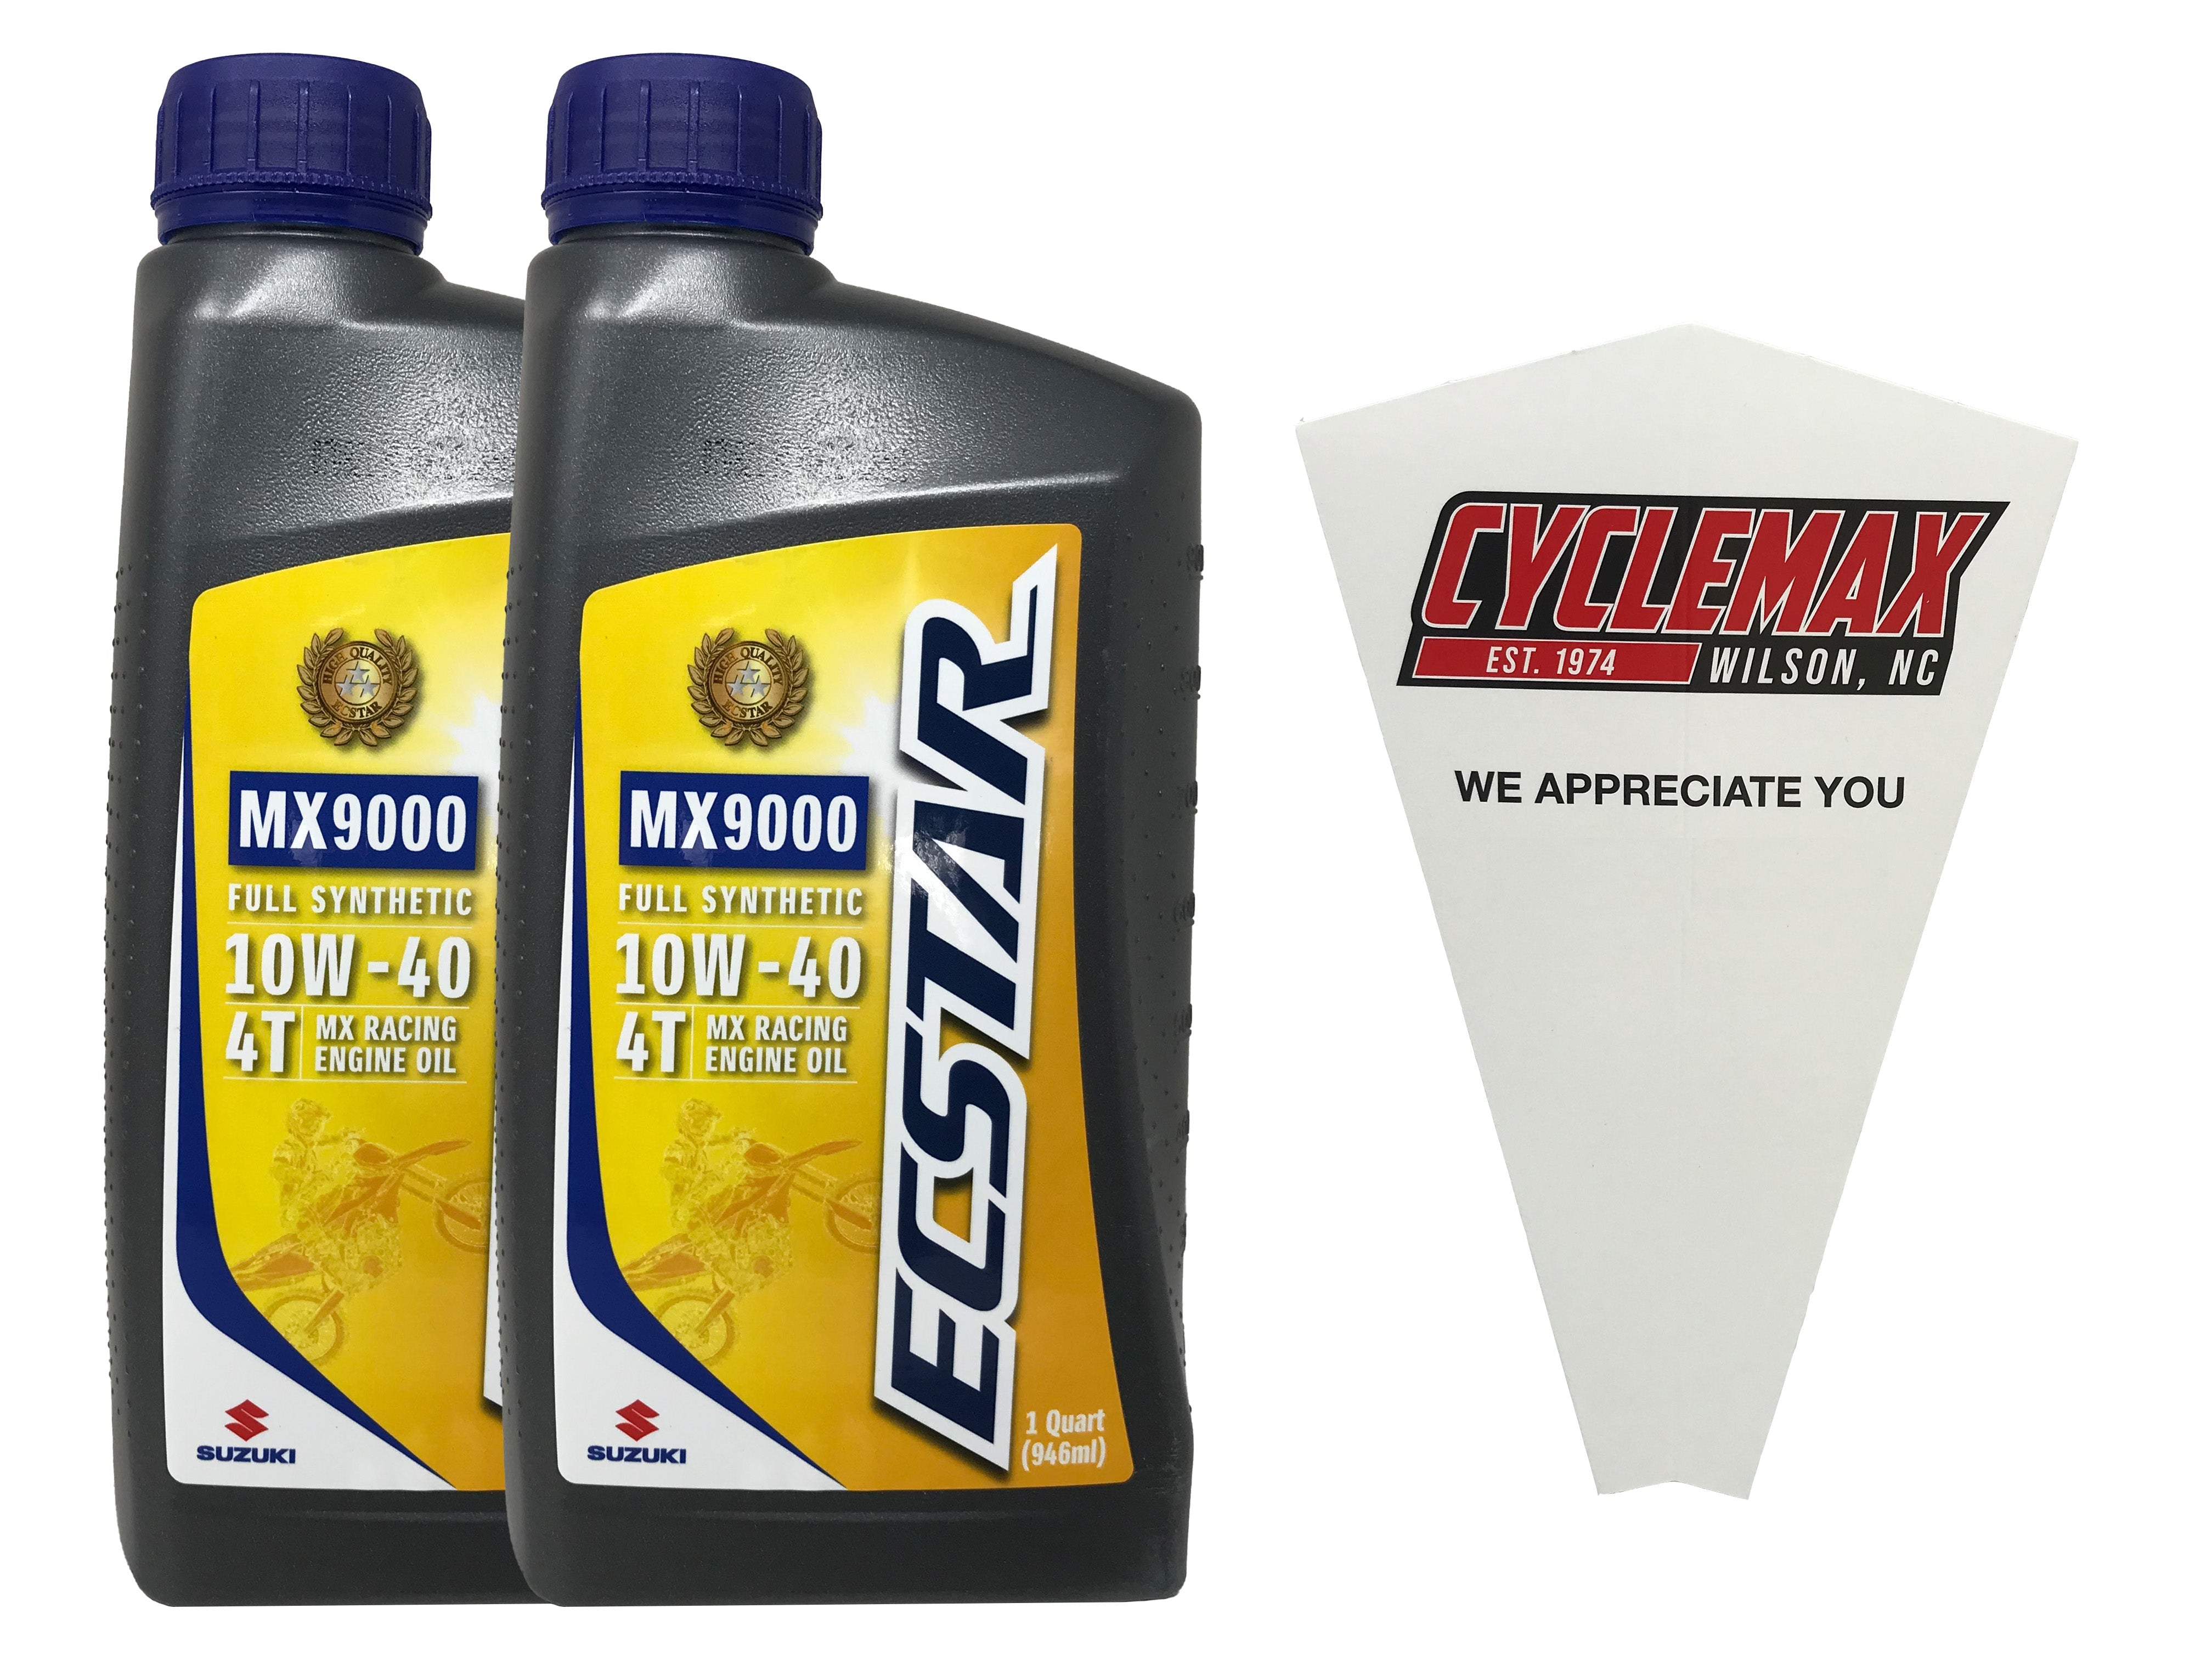 Cyclemax Two Pack for Suzuki Ecstar Full Synthetic Blend 4-Stroke 10W-40 Oil 990A0-01E50-01Q Contains Two Quarts and a Funnel